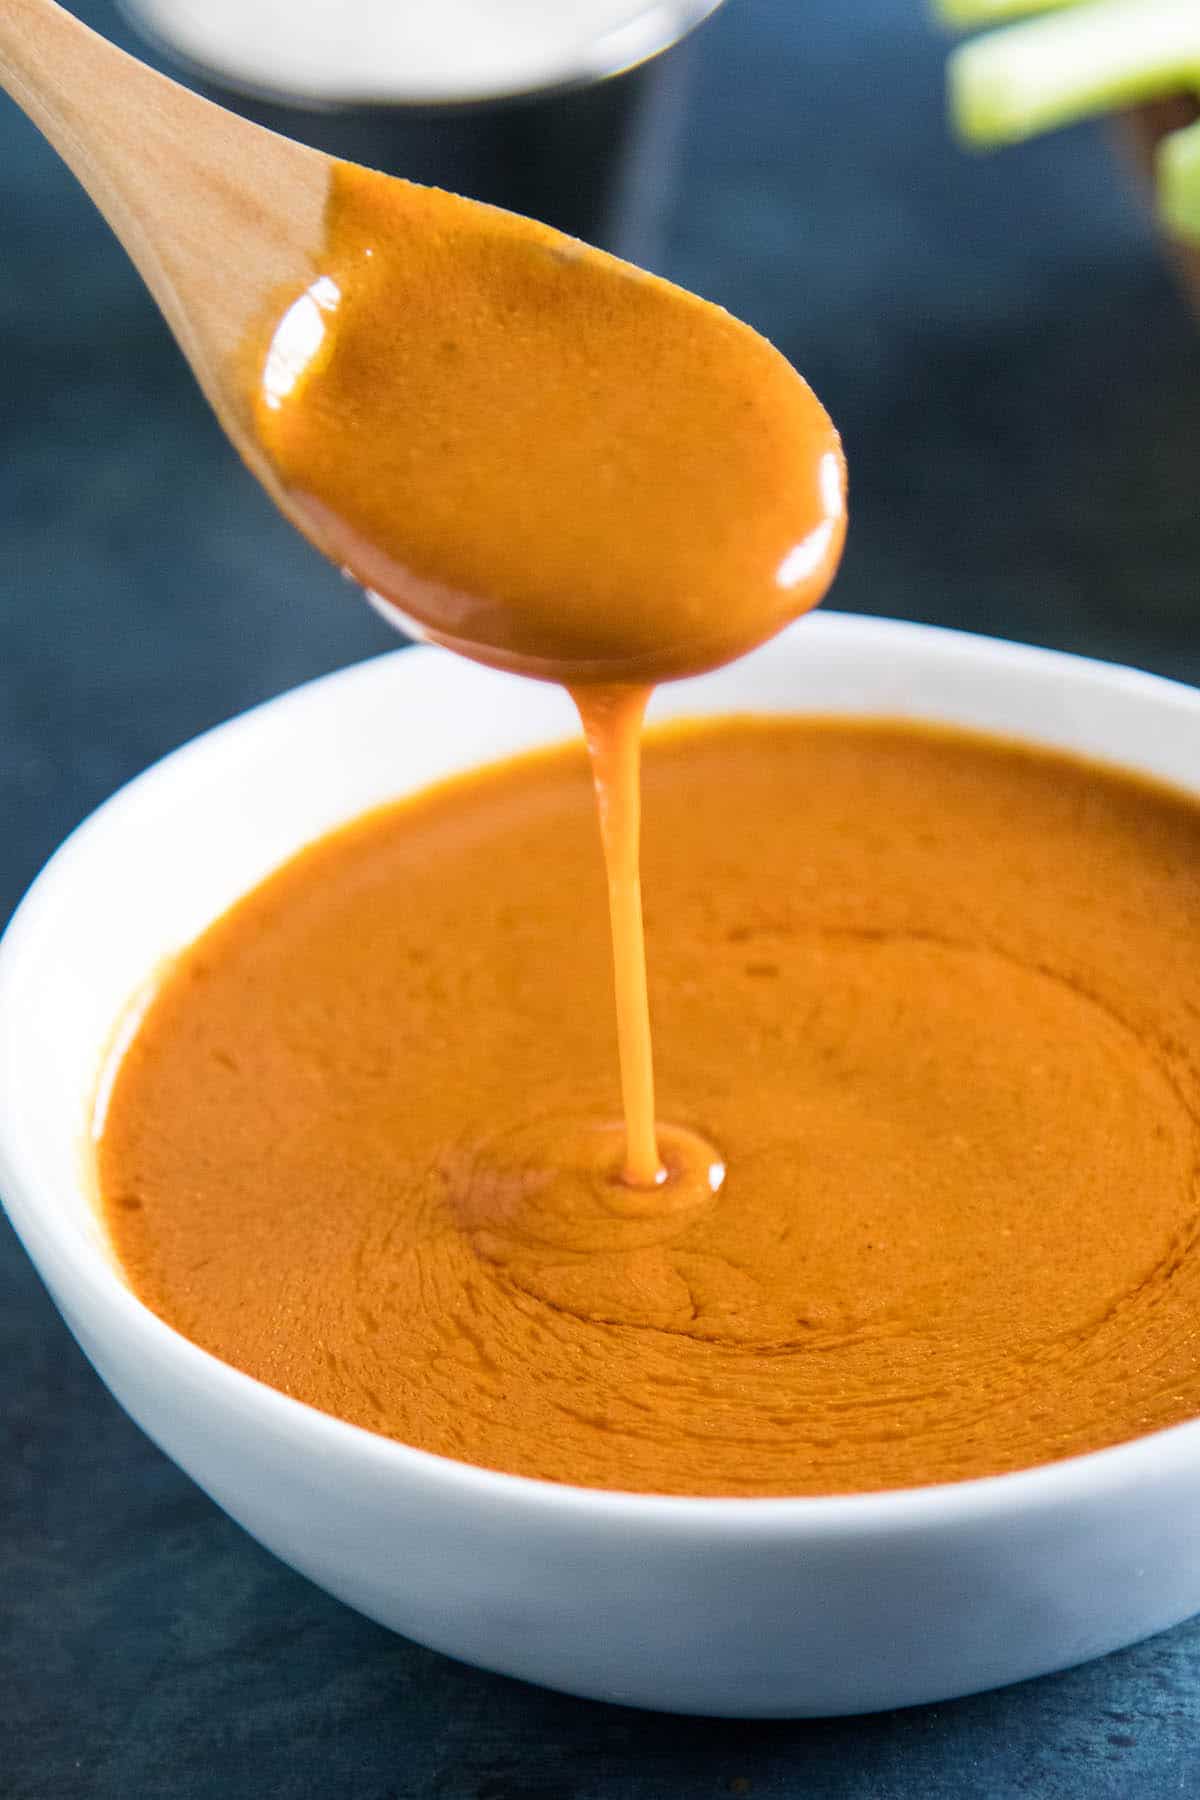 A spoonful of the delicious homemade buffalo sauce.